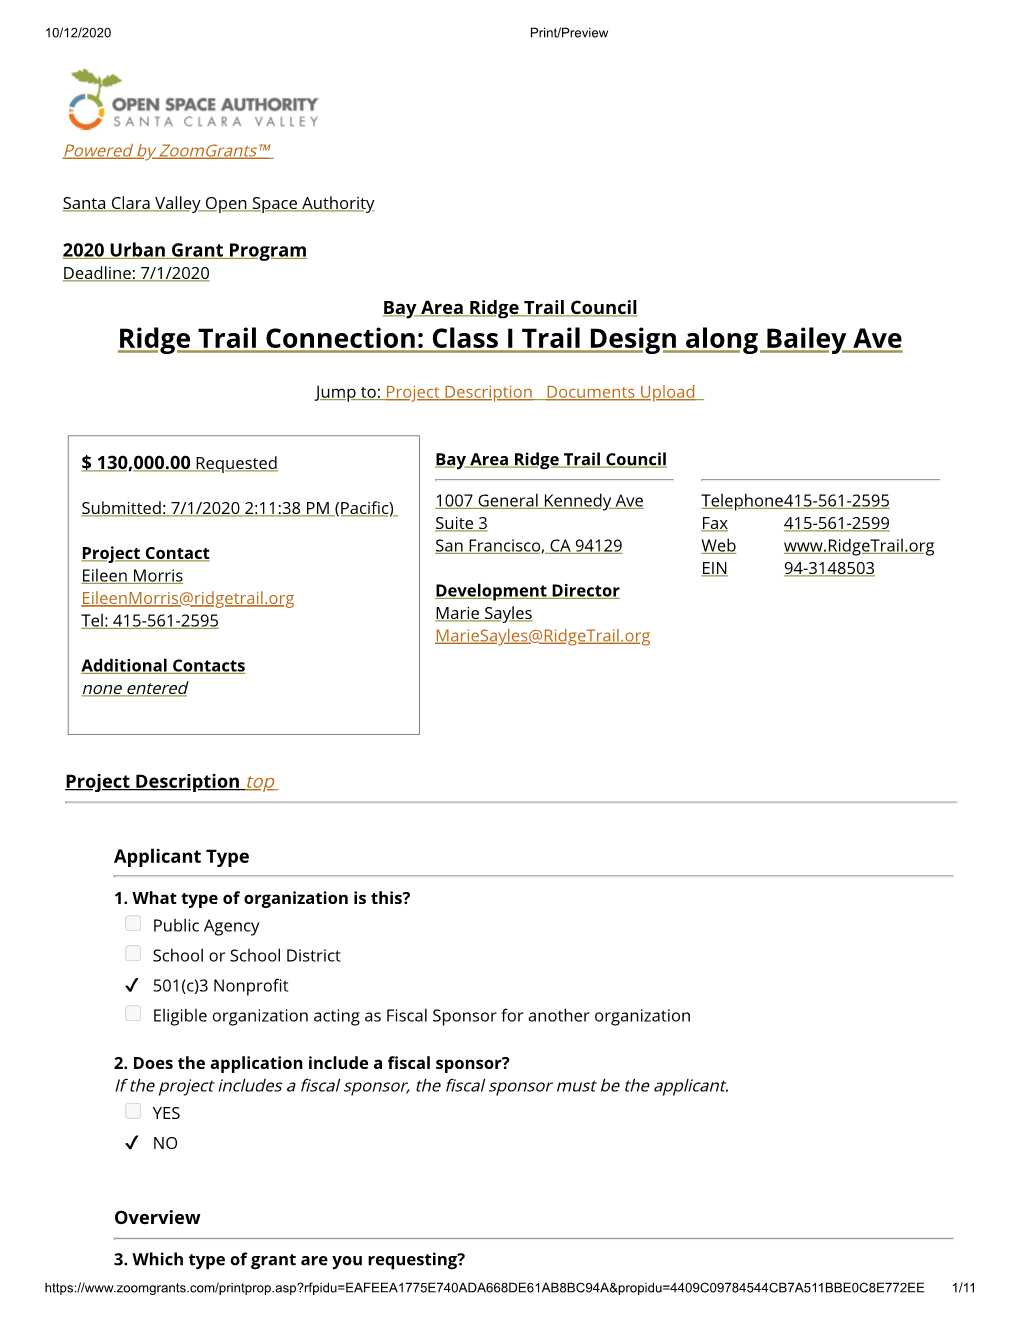 Ridge Trail Connection: Class I Trail Design Along Bailey Ave